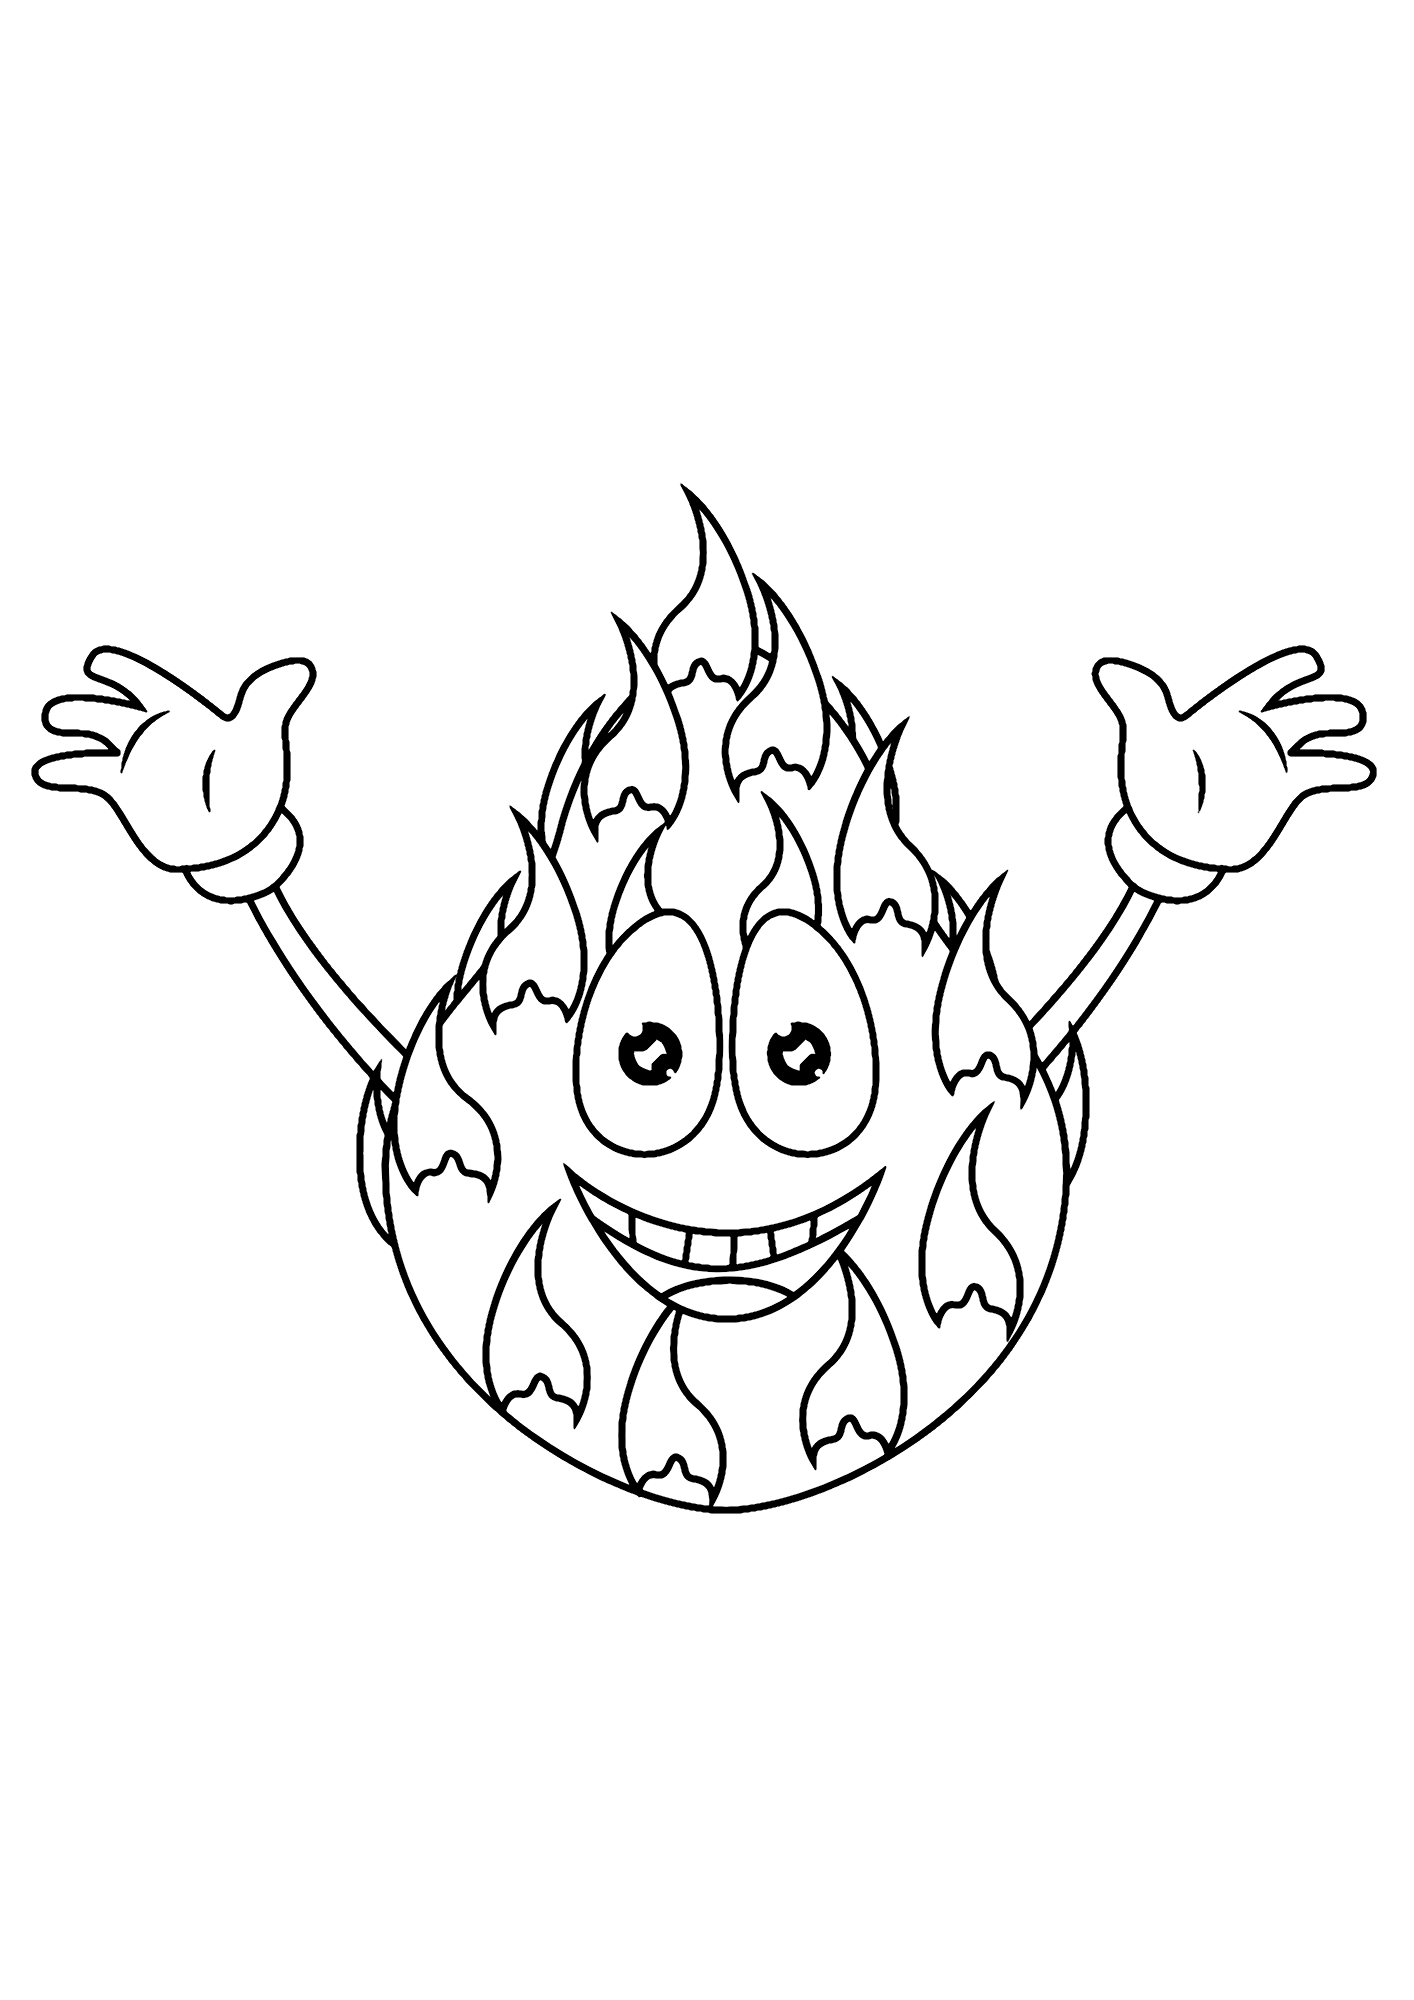 Dragon Cartoon Coloring Pages